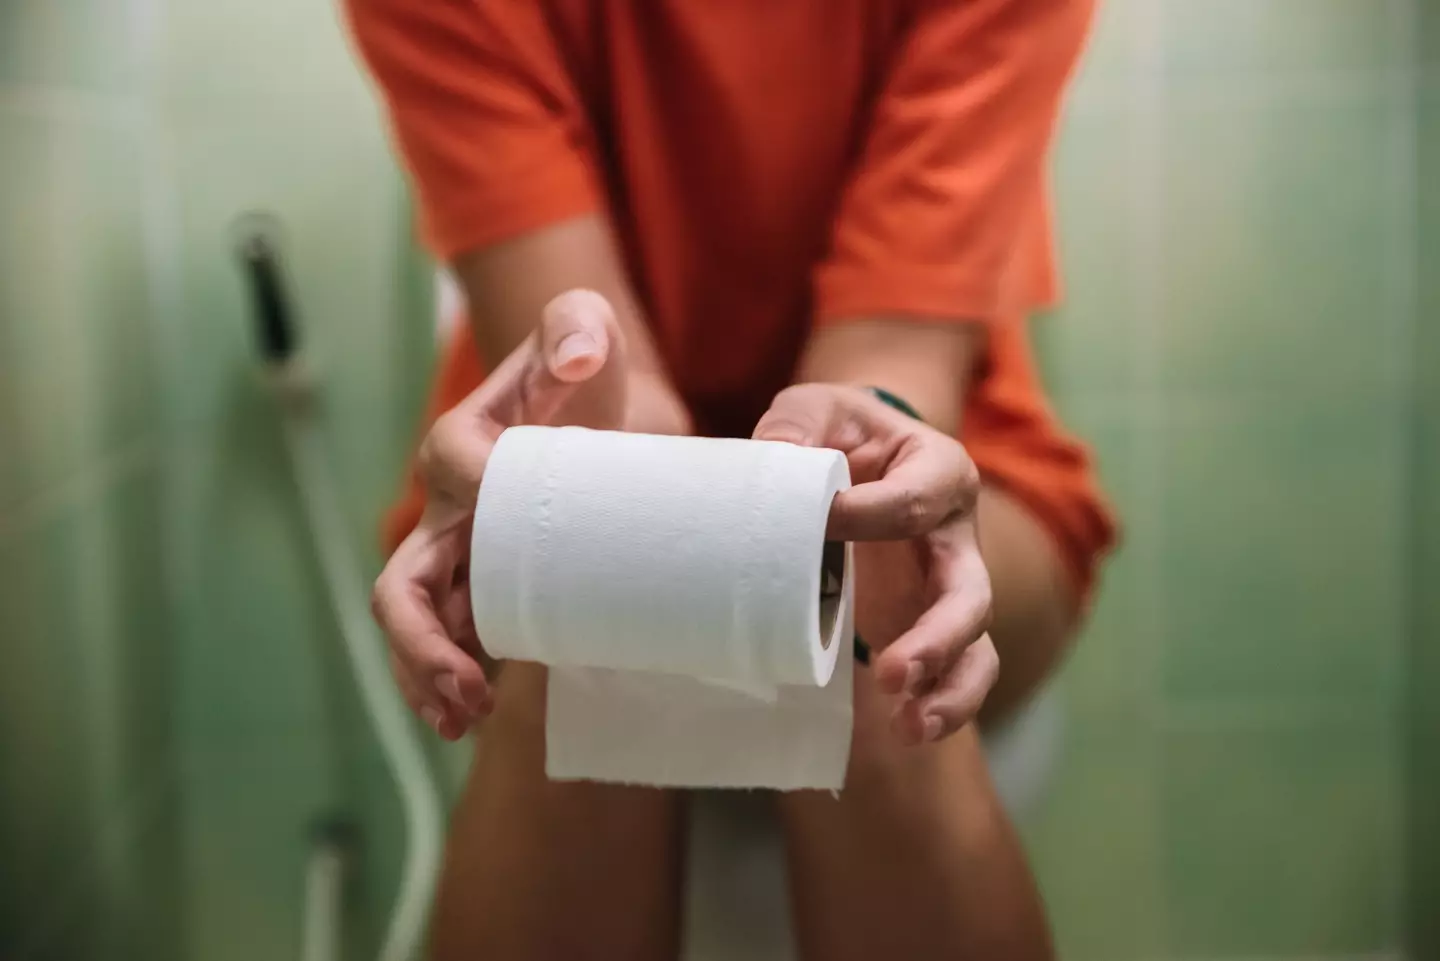 You should keep an eye on the consistency and regularity of your bowel movements. (Antonio Hugo Photo/Getty)